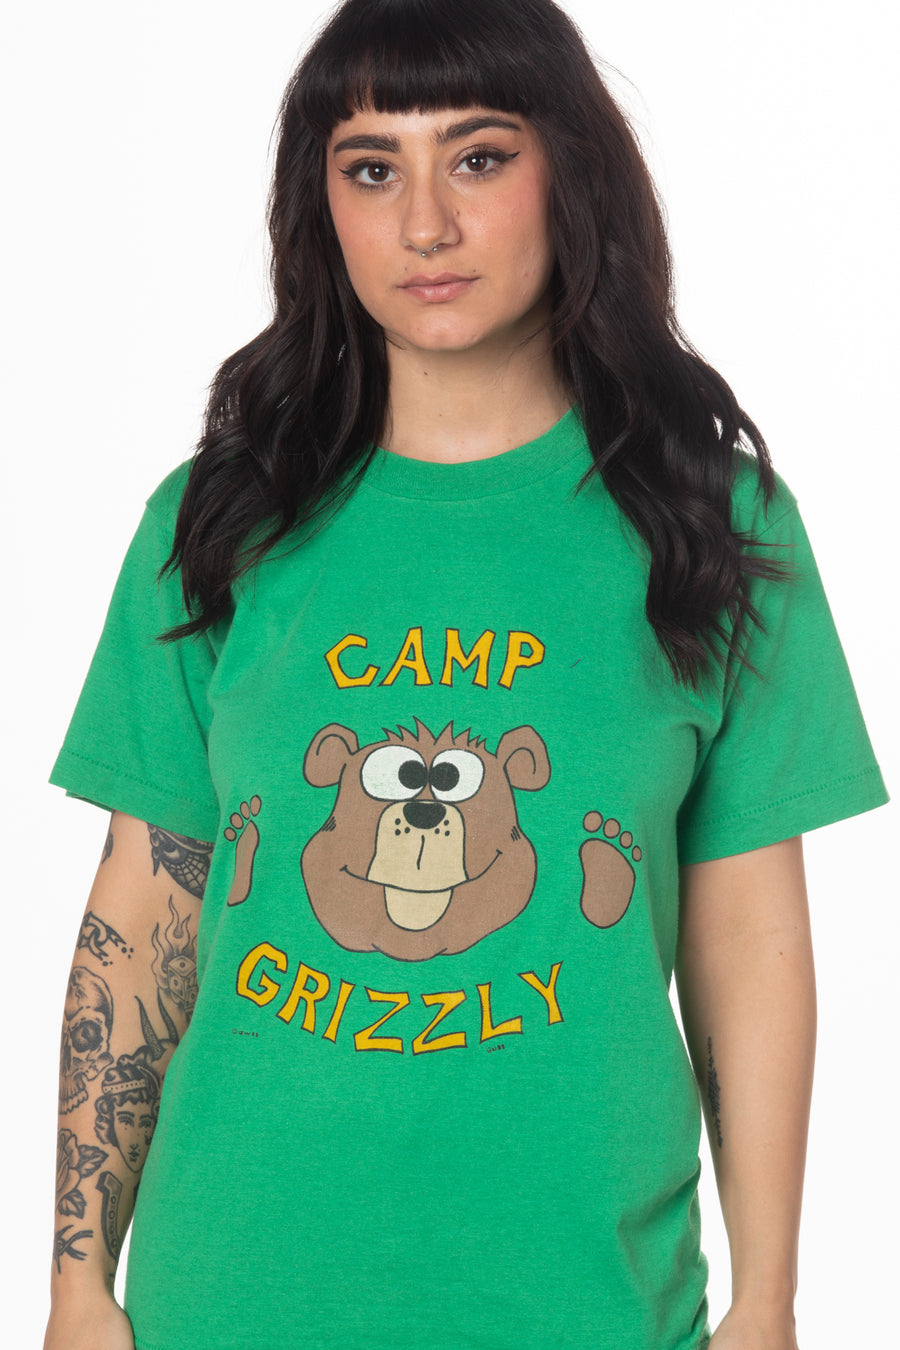 VINTAGE CAMP GRIZZLY GRAPHIC TEE